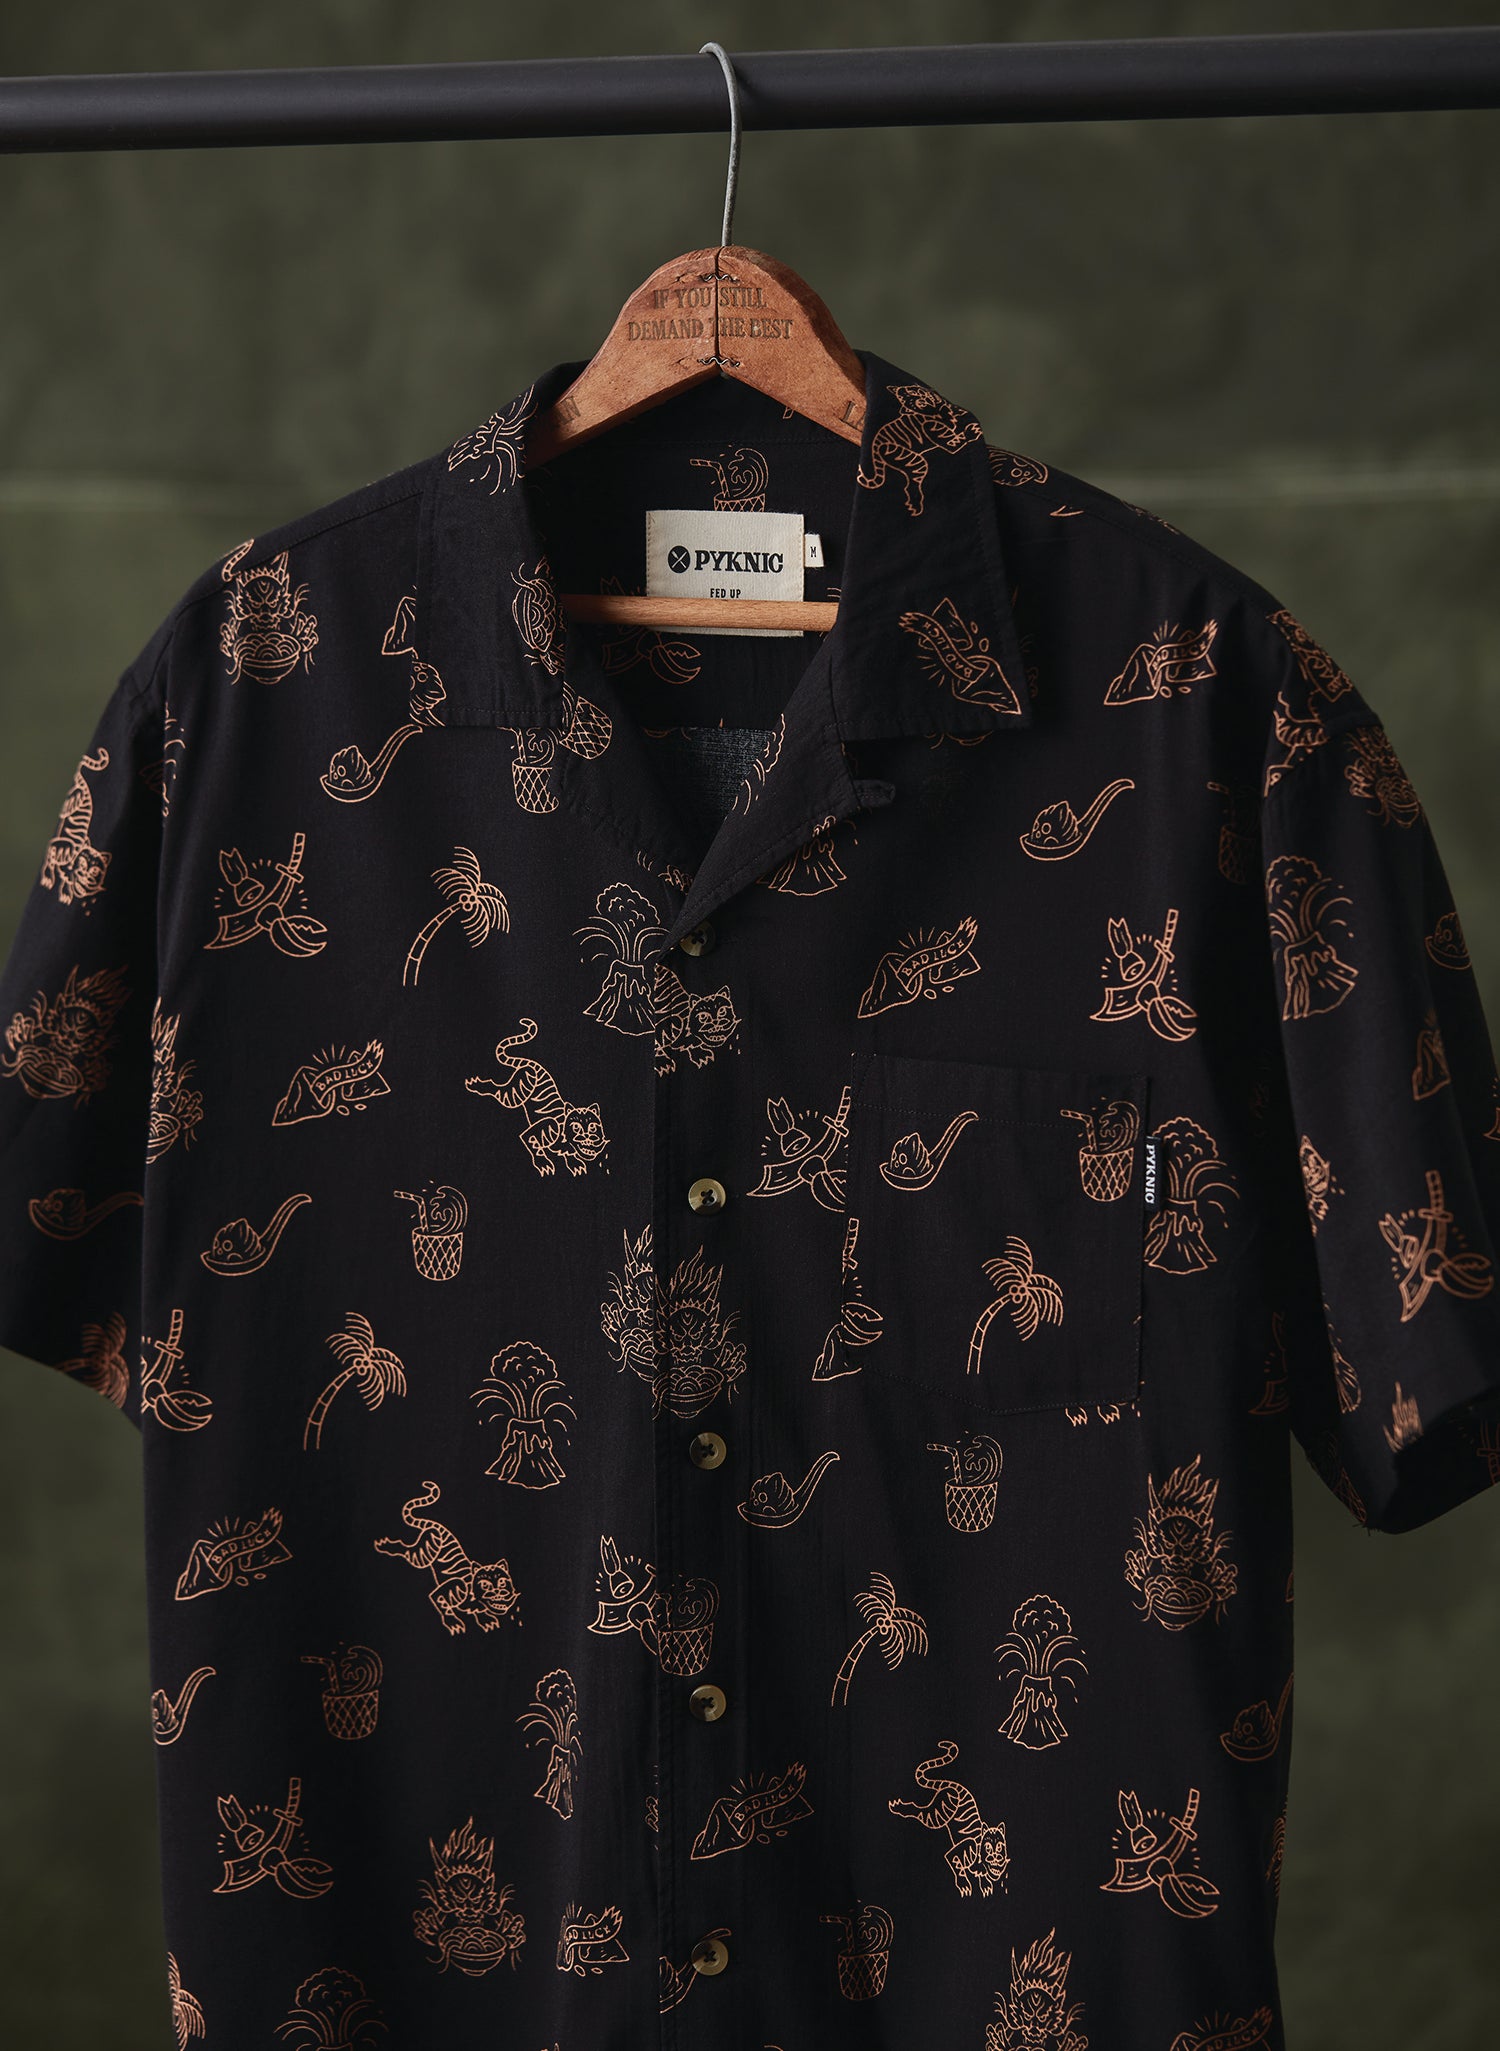 Pyknic | Spicy Noods Vacation Casual Button-Up Shirt | Button Down Shirt with All Over Graphic Print, Chinese Food Shirt, Asian Food Lover Shirt, Palm Tree & Volcano Print, Dim Sum Button Up Shirt, Spicy Ramen Noodles Tiki Shirt, Best Foodie Shirt, Best Foodie Gift, Food Themed Apparel, Food Tattoo Flash, Dragon & Tiger Button Down Shirt, Cool Button Up Shirts